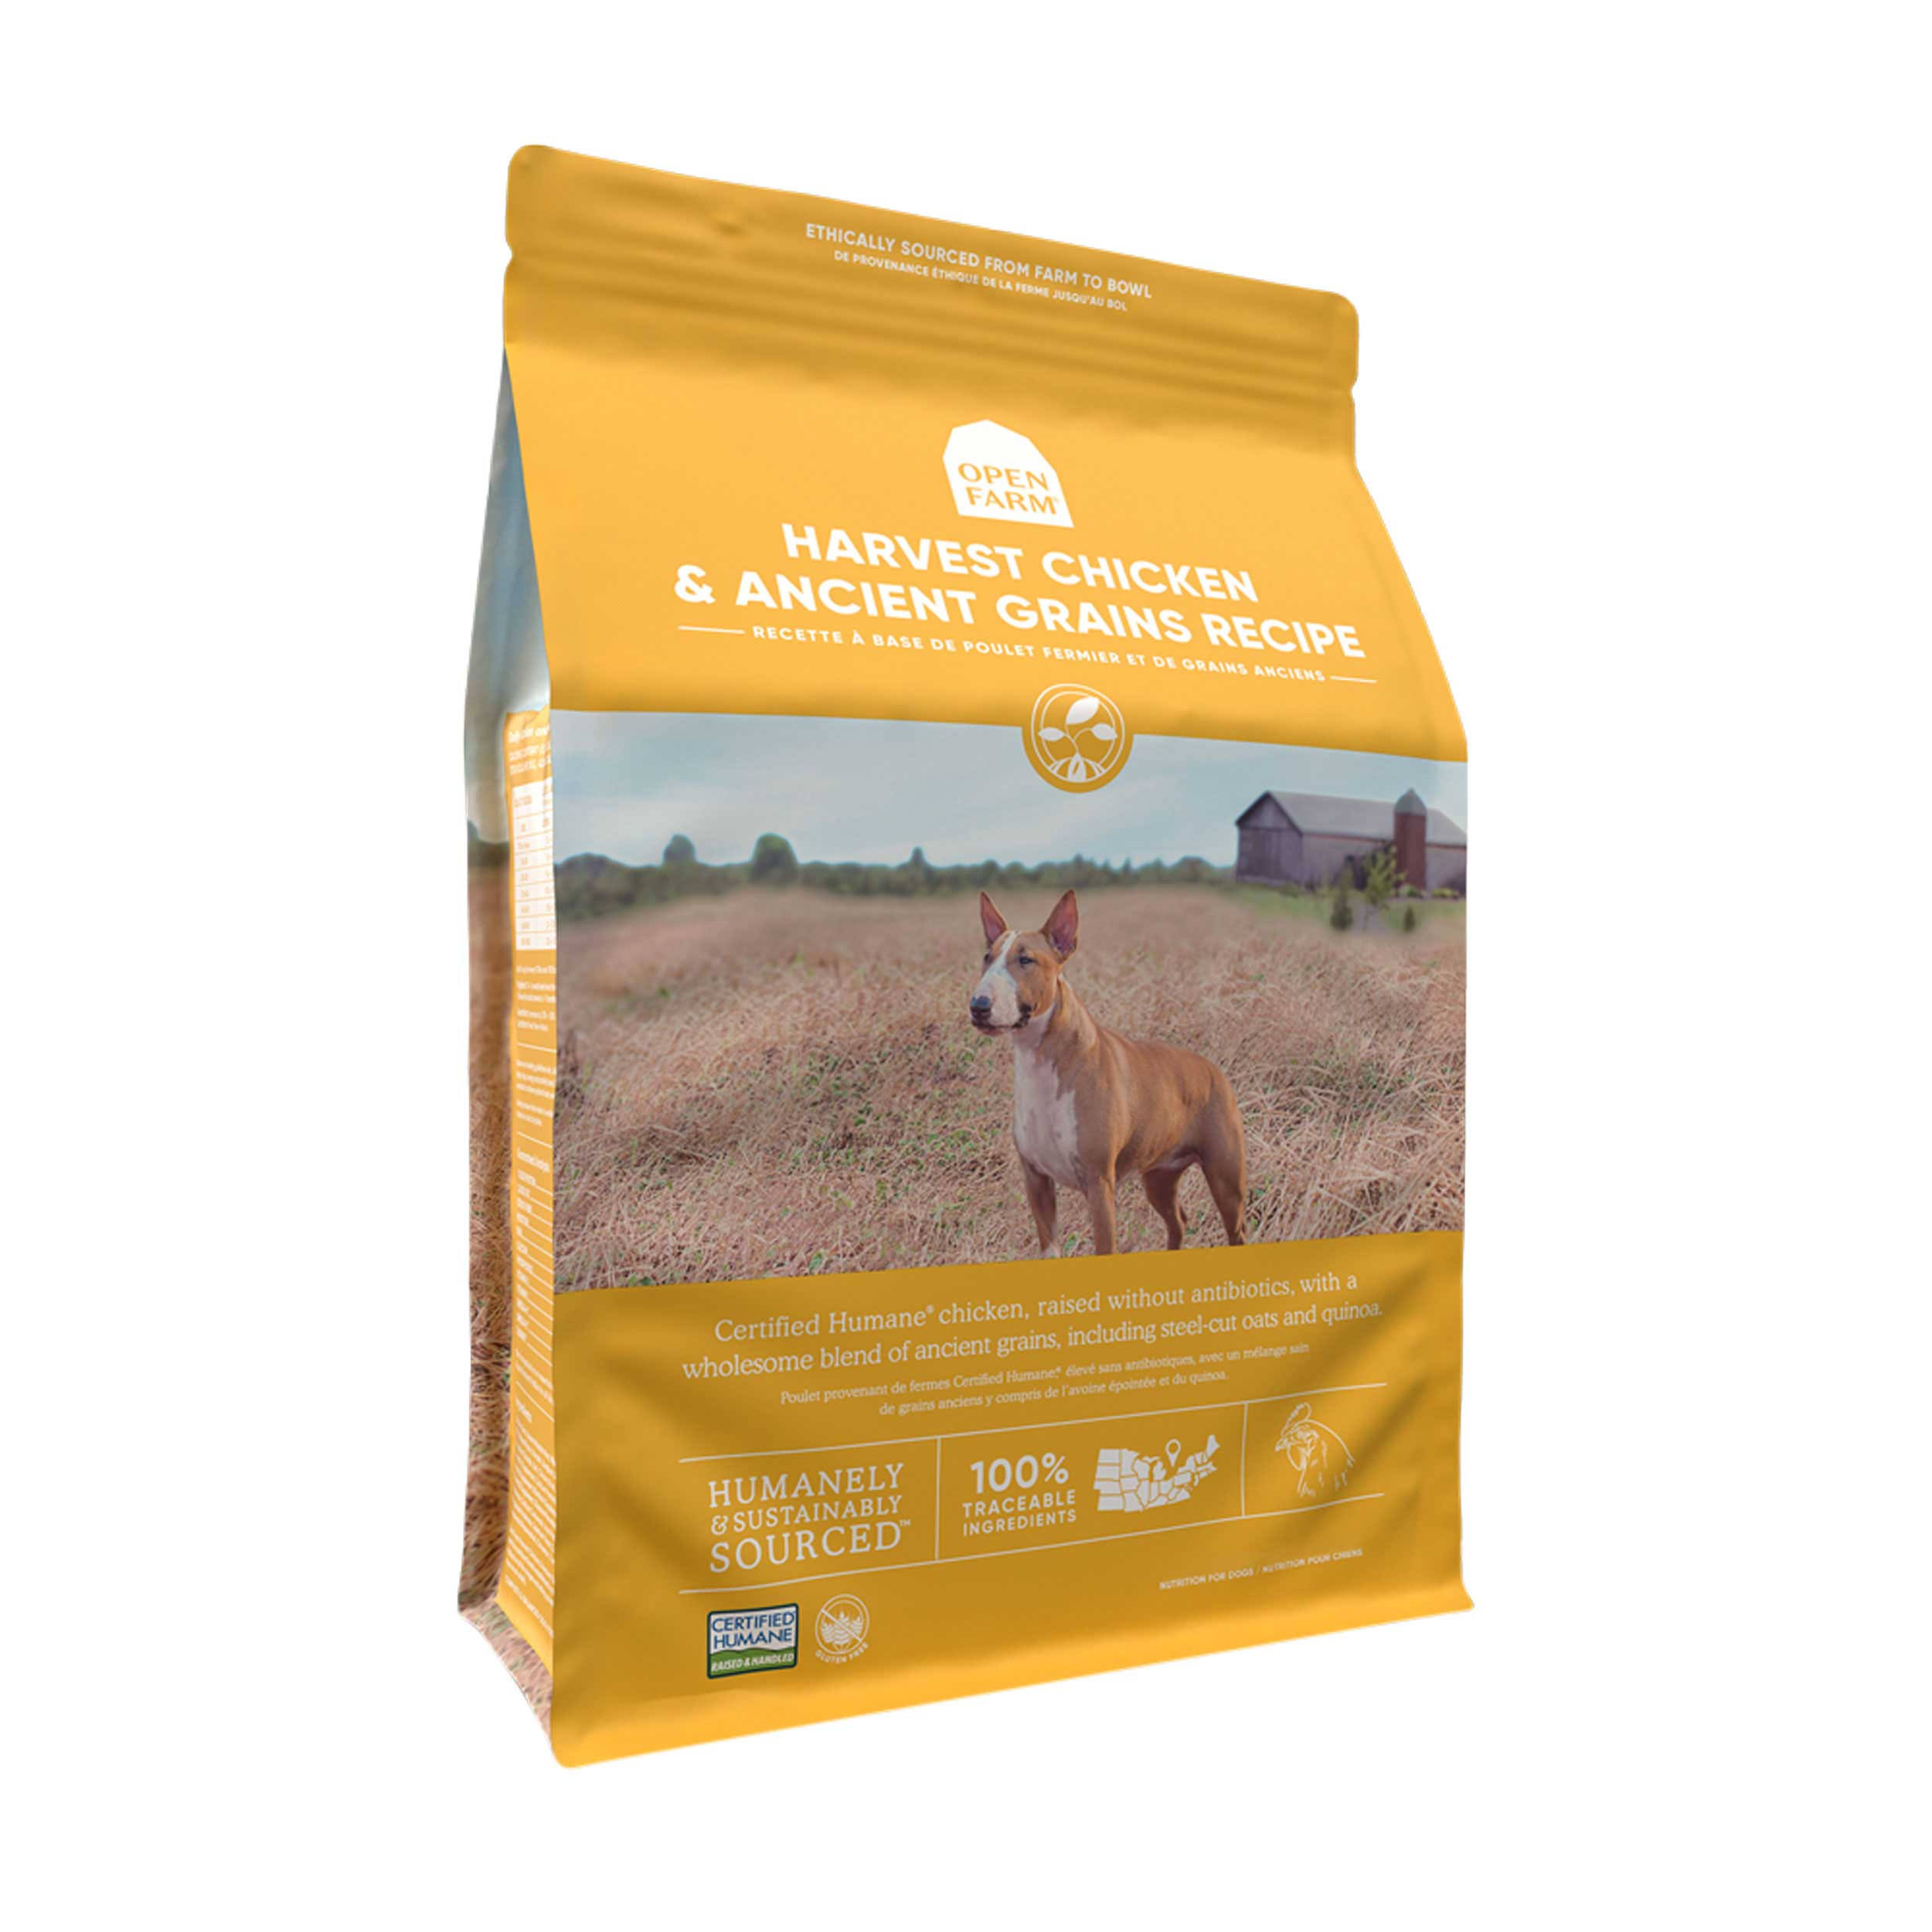 Open Farm Harvest Chicken & Ancient Grains Dry Dog Food - 4-lbs